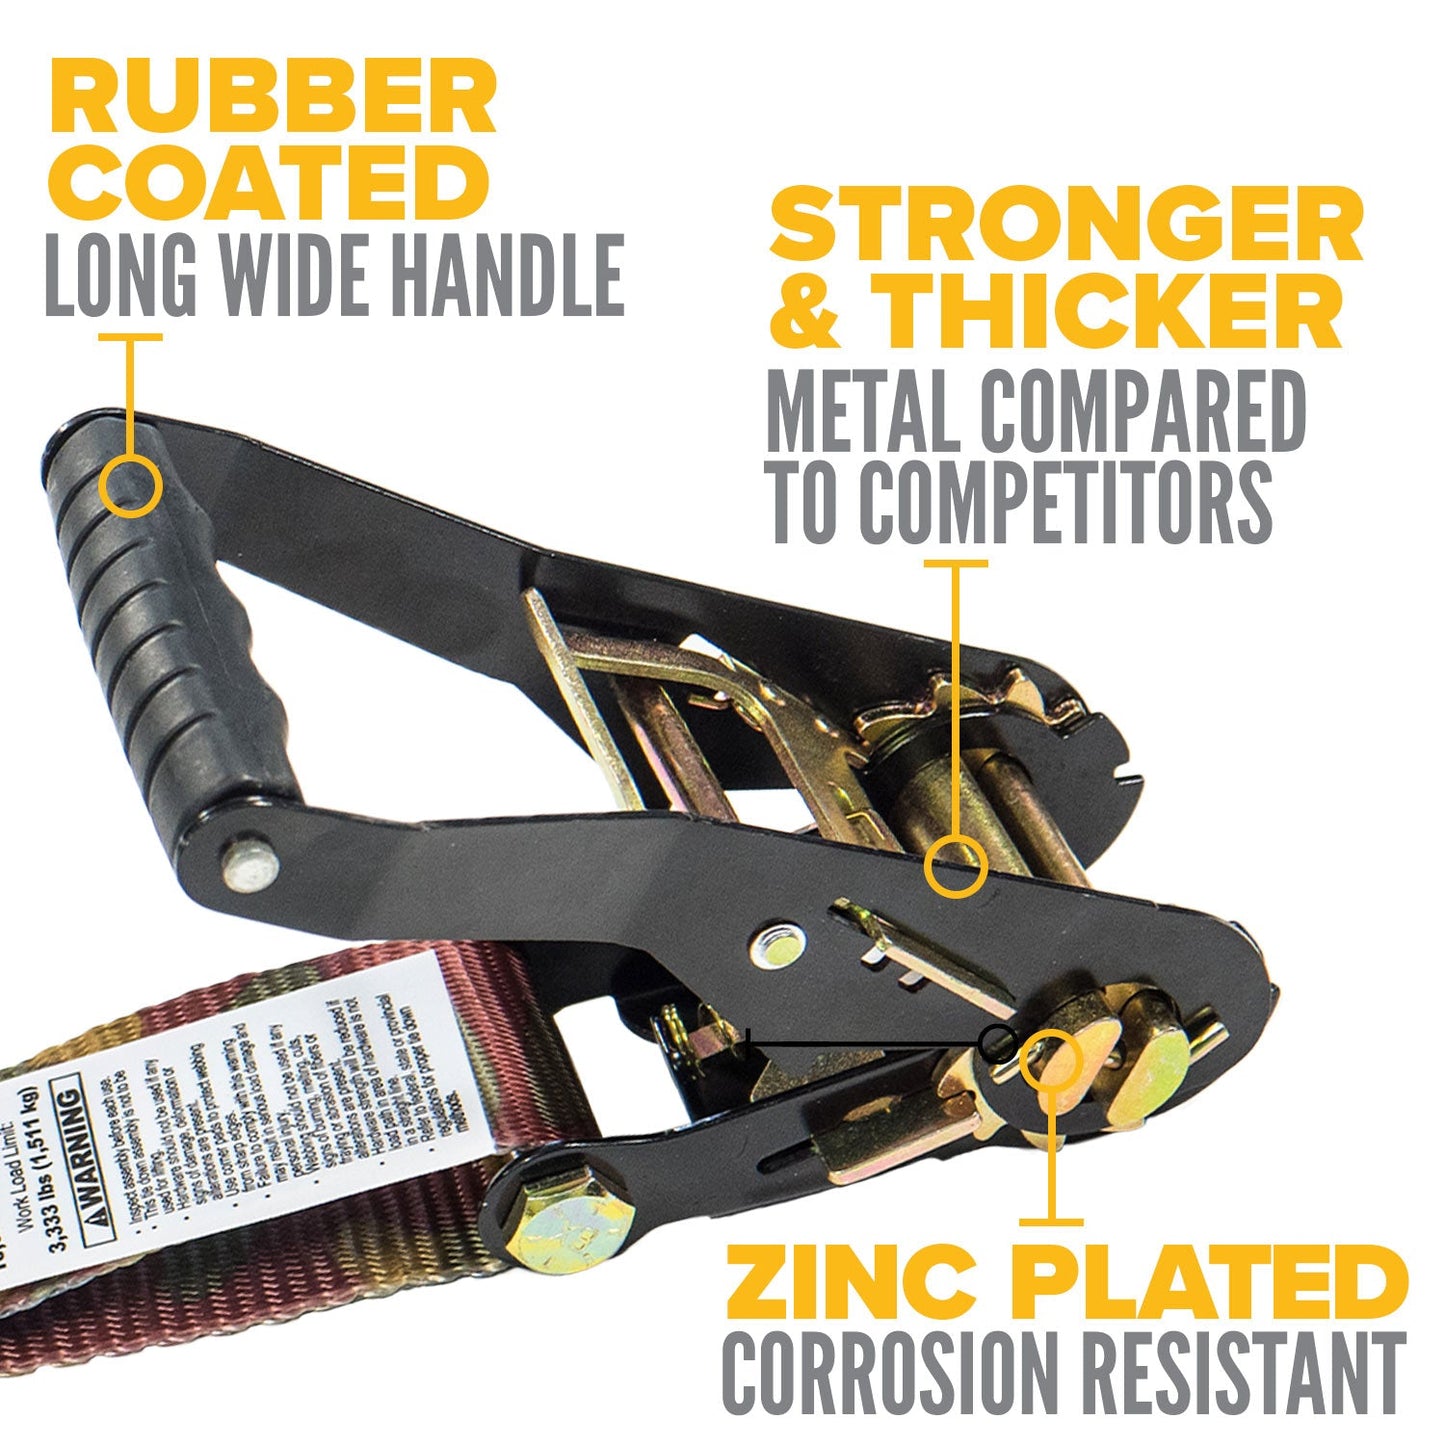 50' ratchet strap -  2" ratchet is strong and corrosion resistant